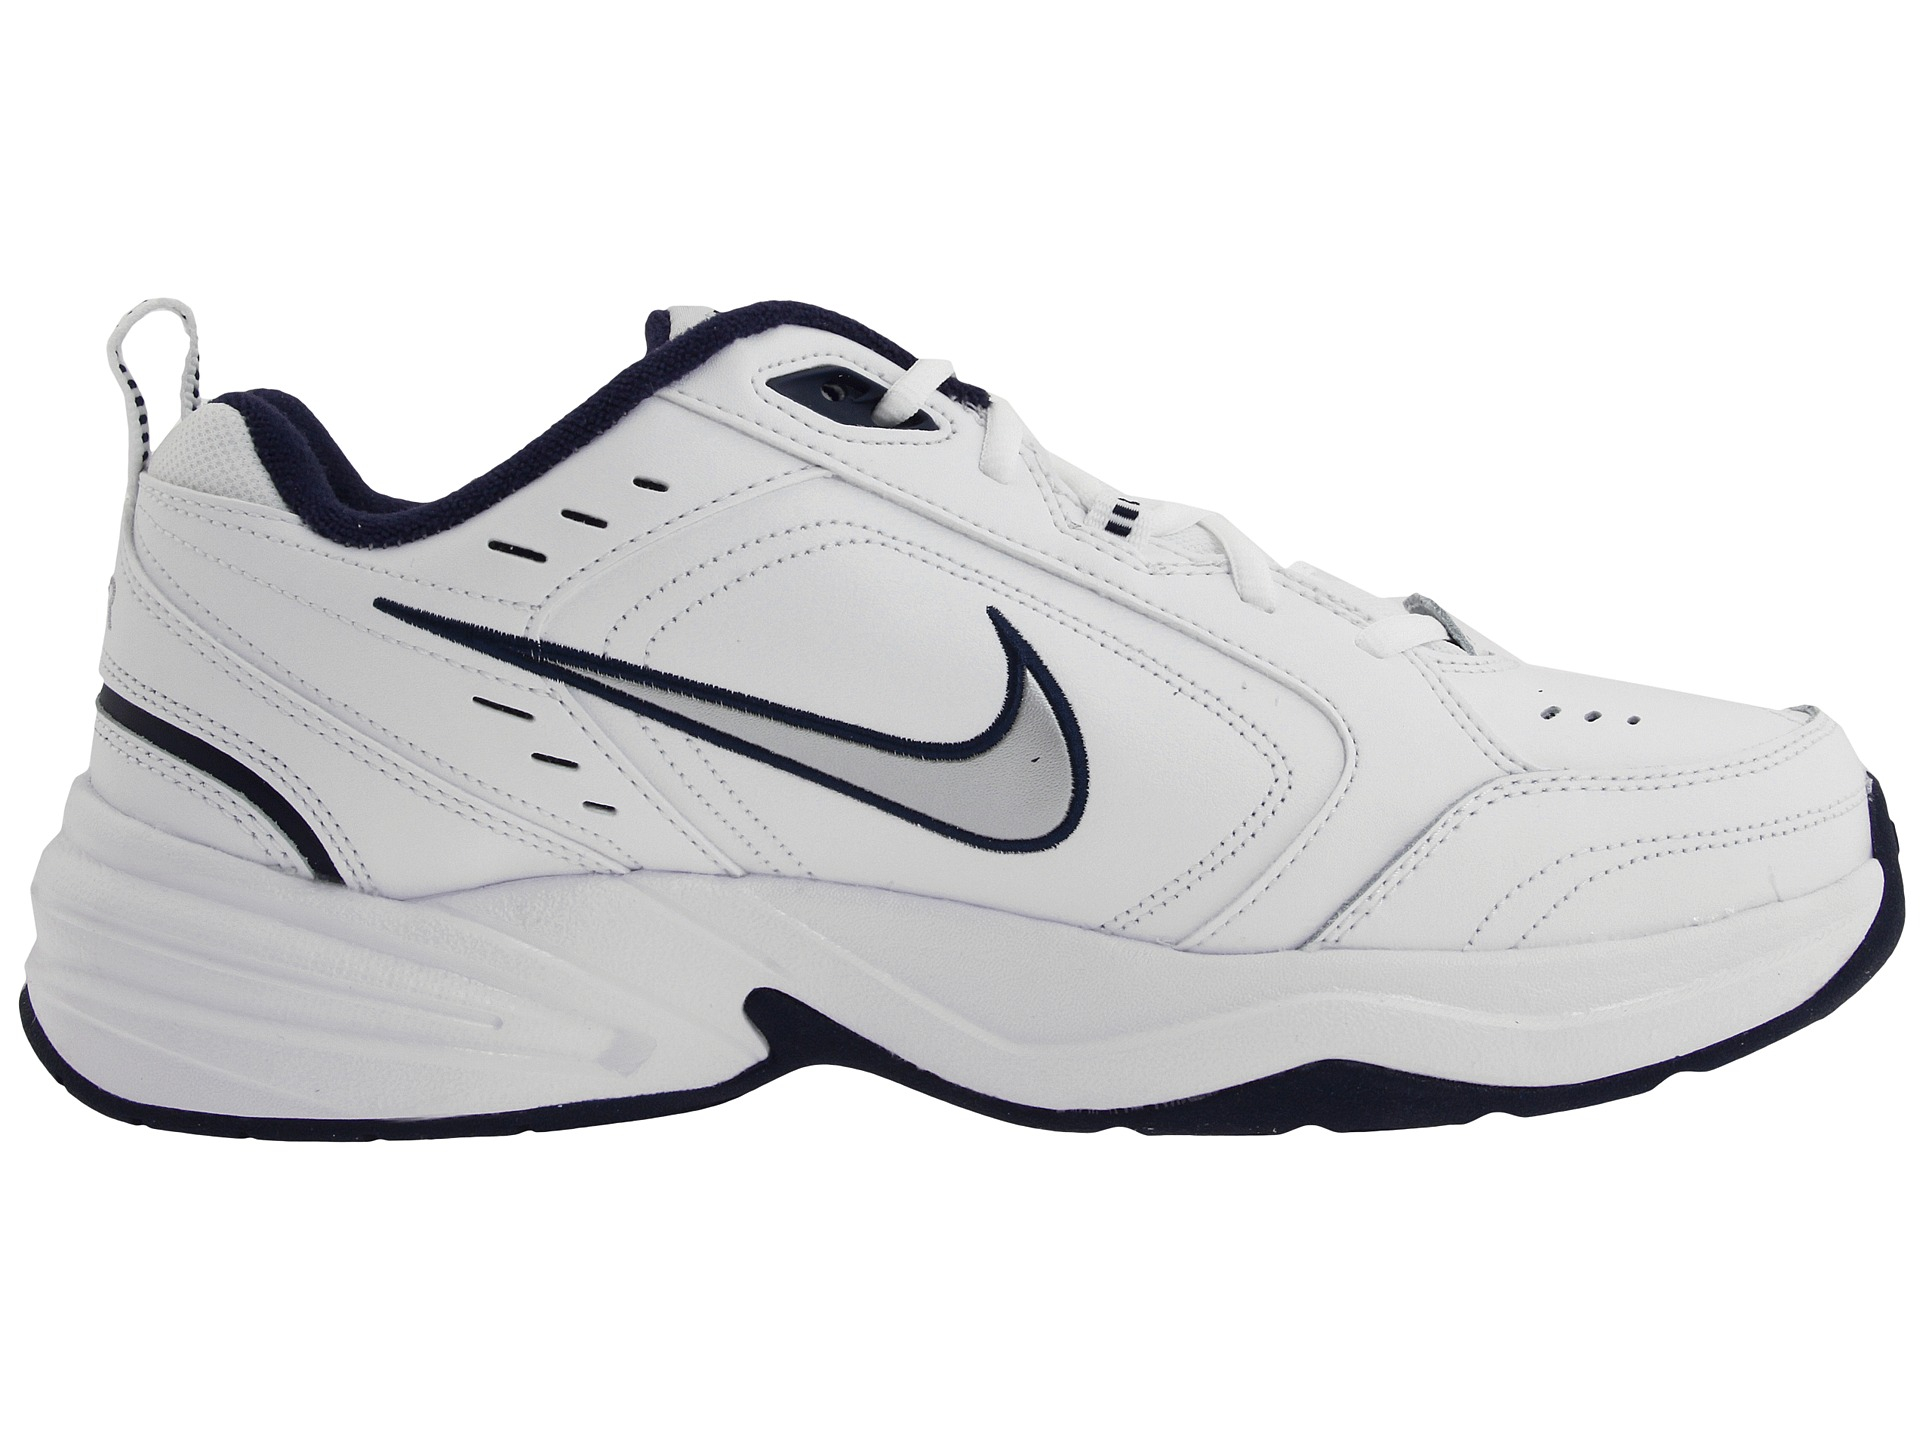 Lyst - Nike Air Monarch Iv in White for Men